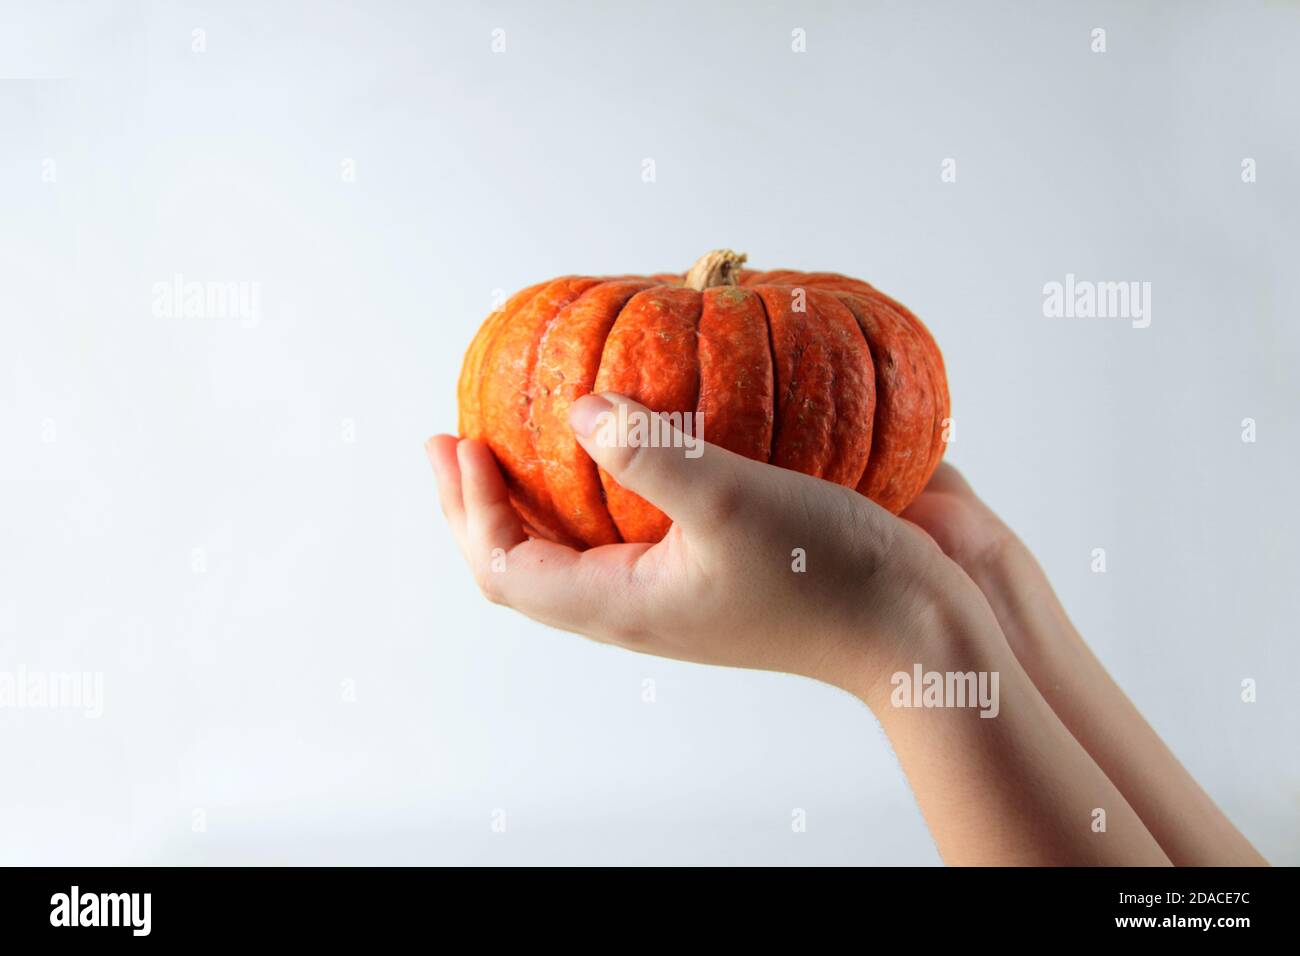 kids hands with pumpkin isolated on white backgroud. Image contains copy space Stock Photo